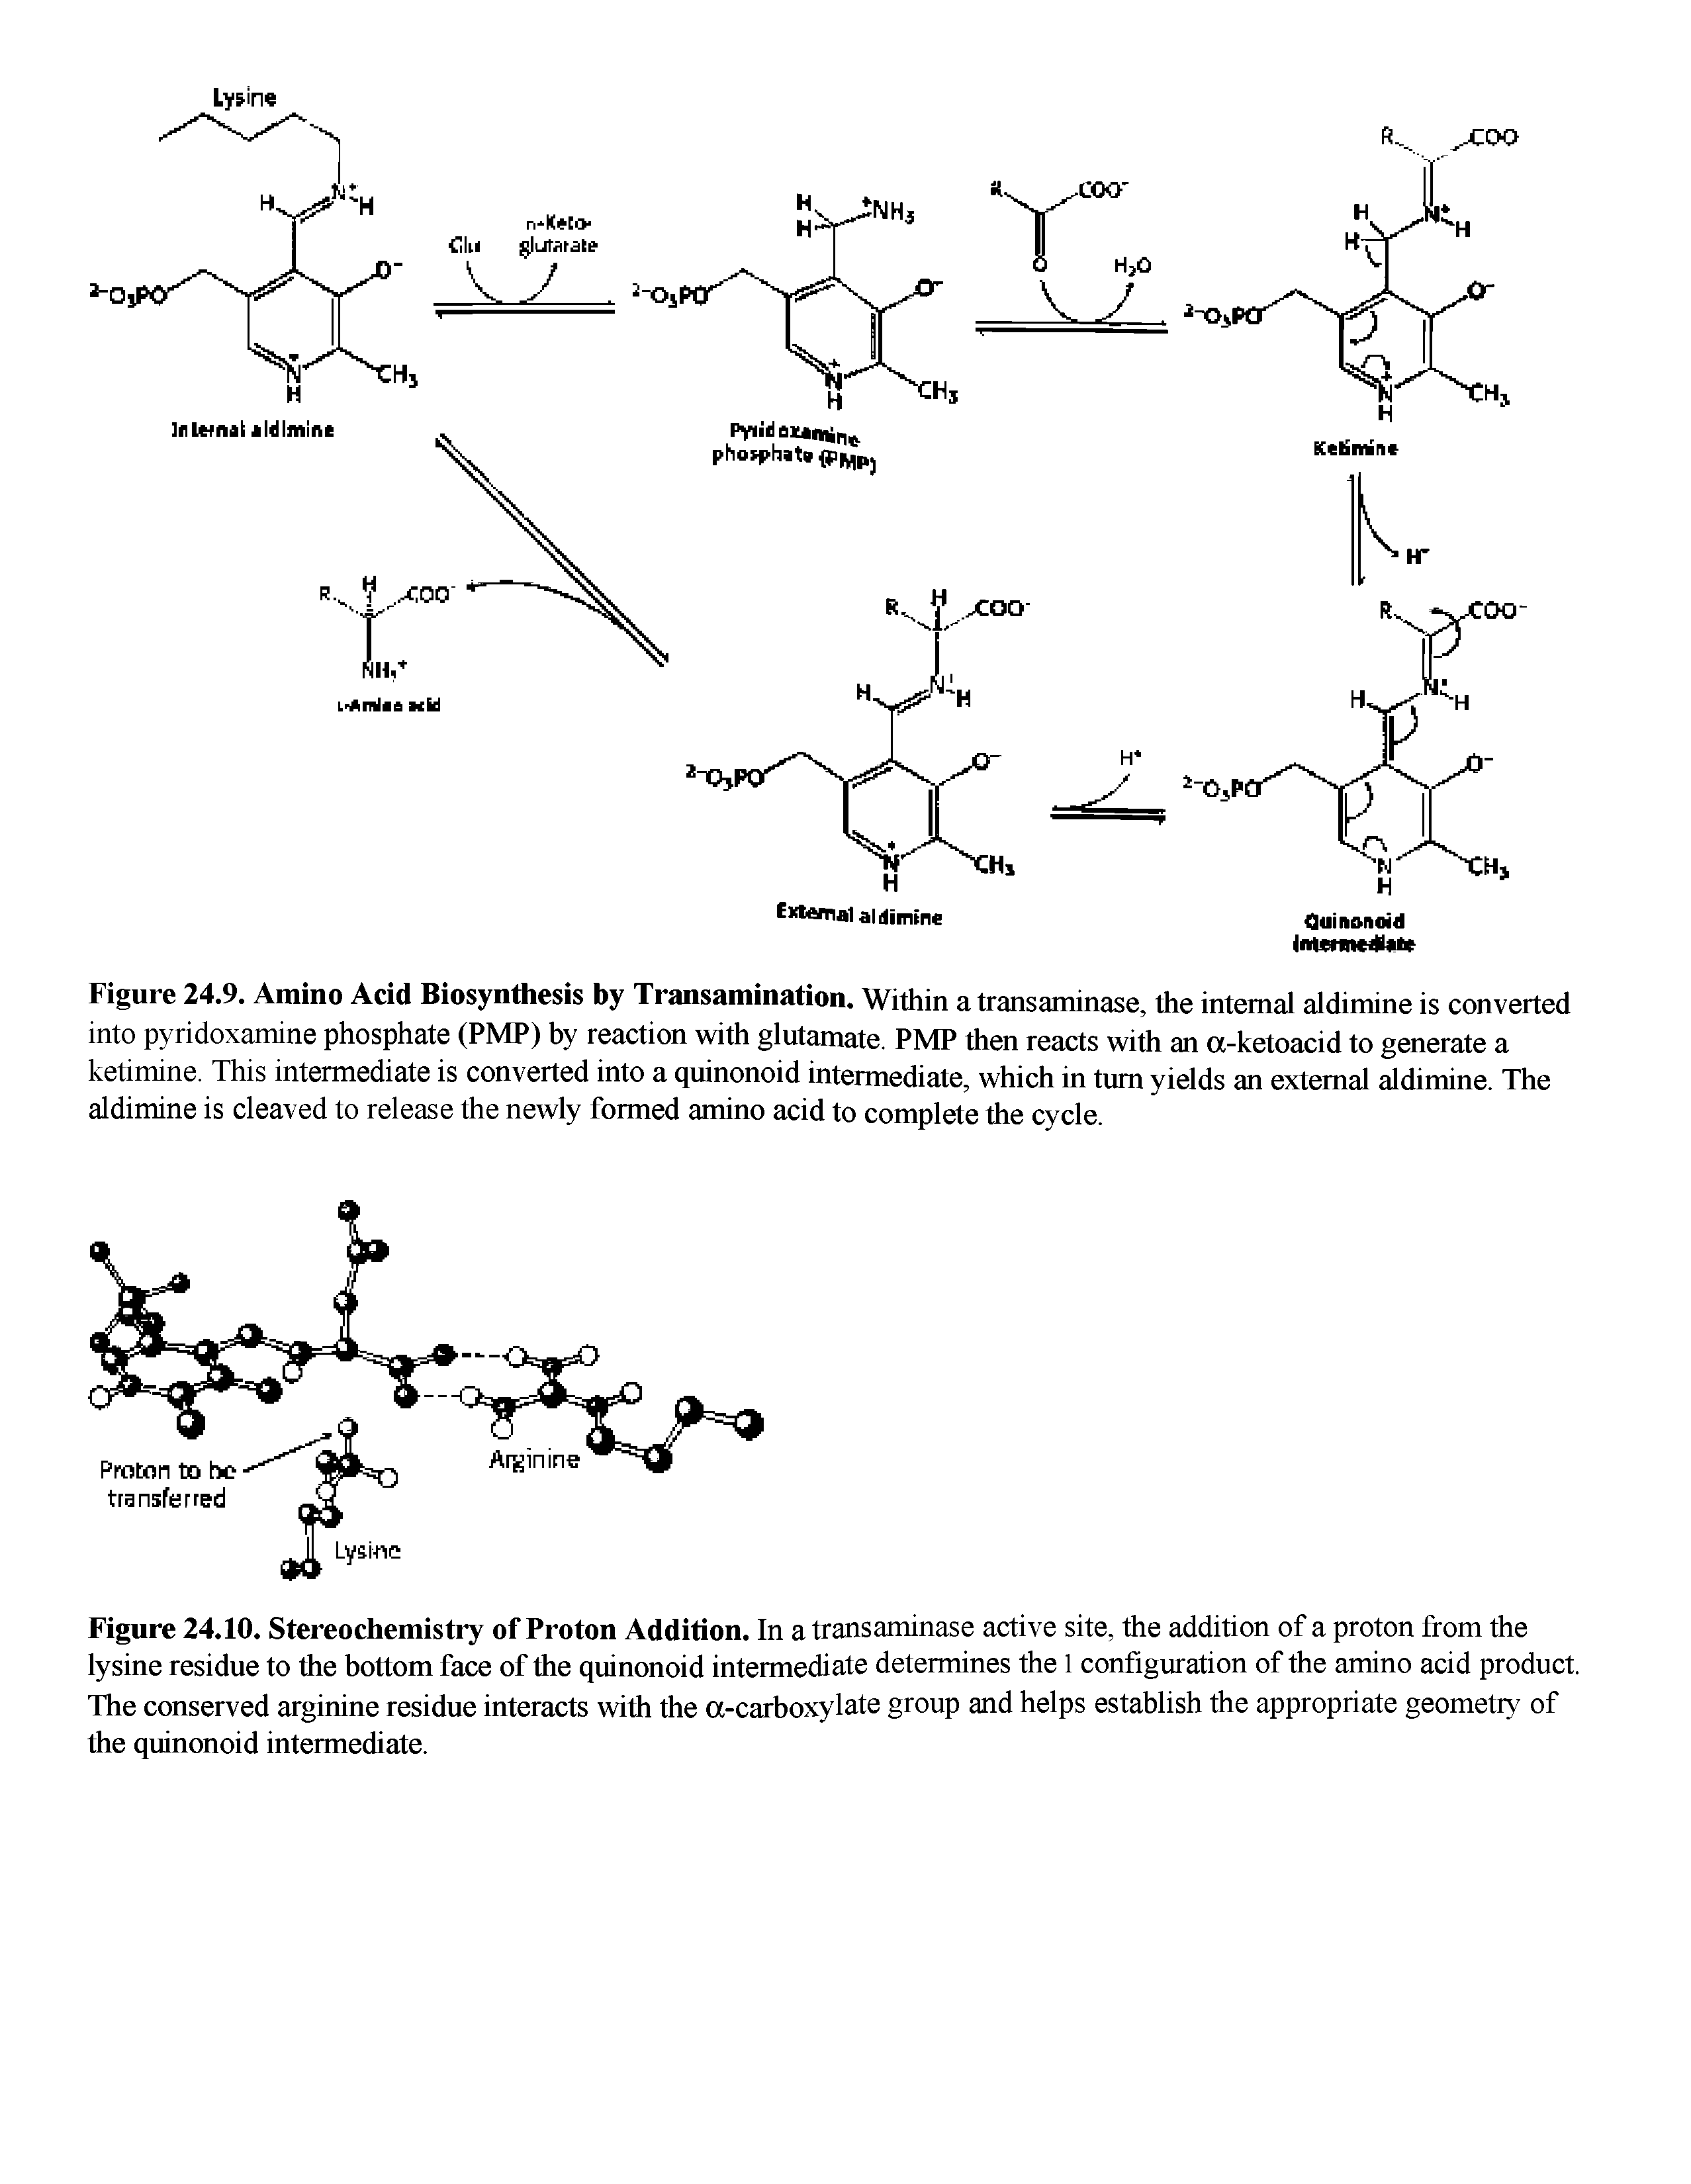 Figure 24.10. Stereochemistry of Proton Addition. In a transaminase active site, the addition of a proton from the lysine residue to the bottom face of the quinonoid intermediate determines the 1 configuration of the amino acid product. The conserved arginine residue interacts with the a-carboxylate group and helps establish the appropriate geometry of the quinonoid intermediate.